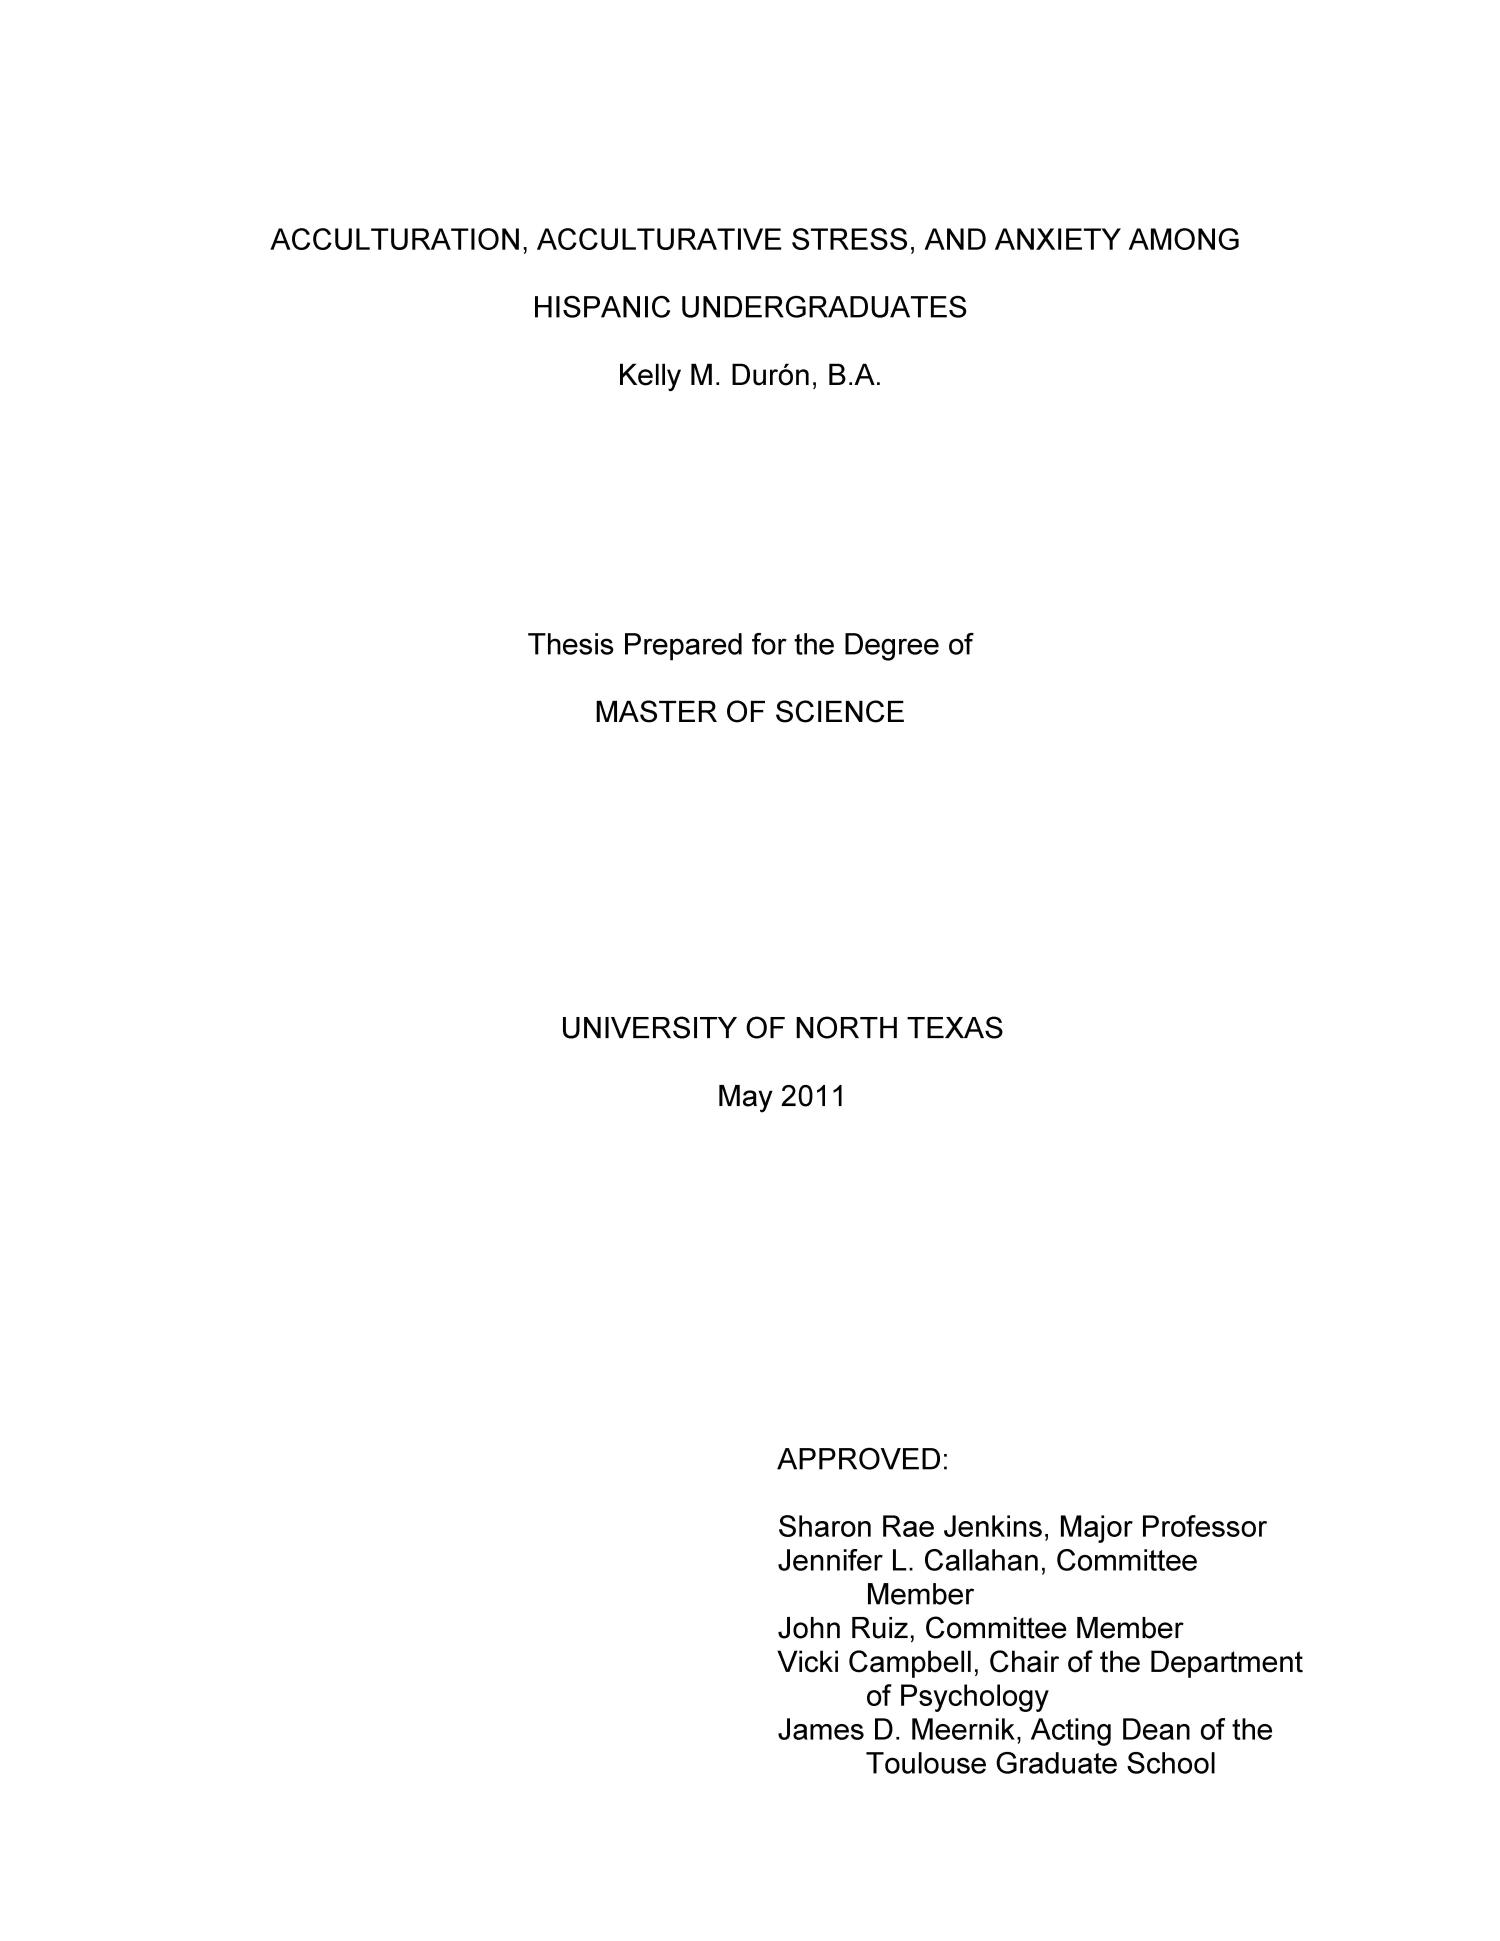 Master thesis certificate